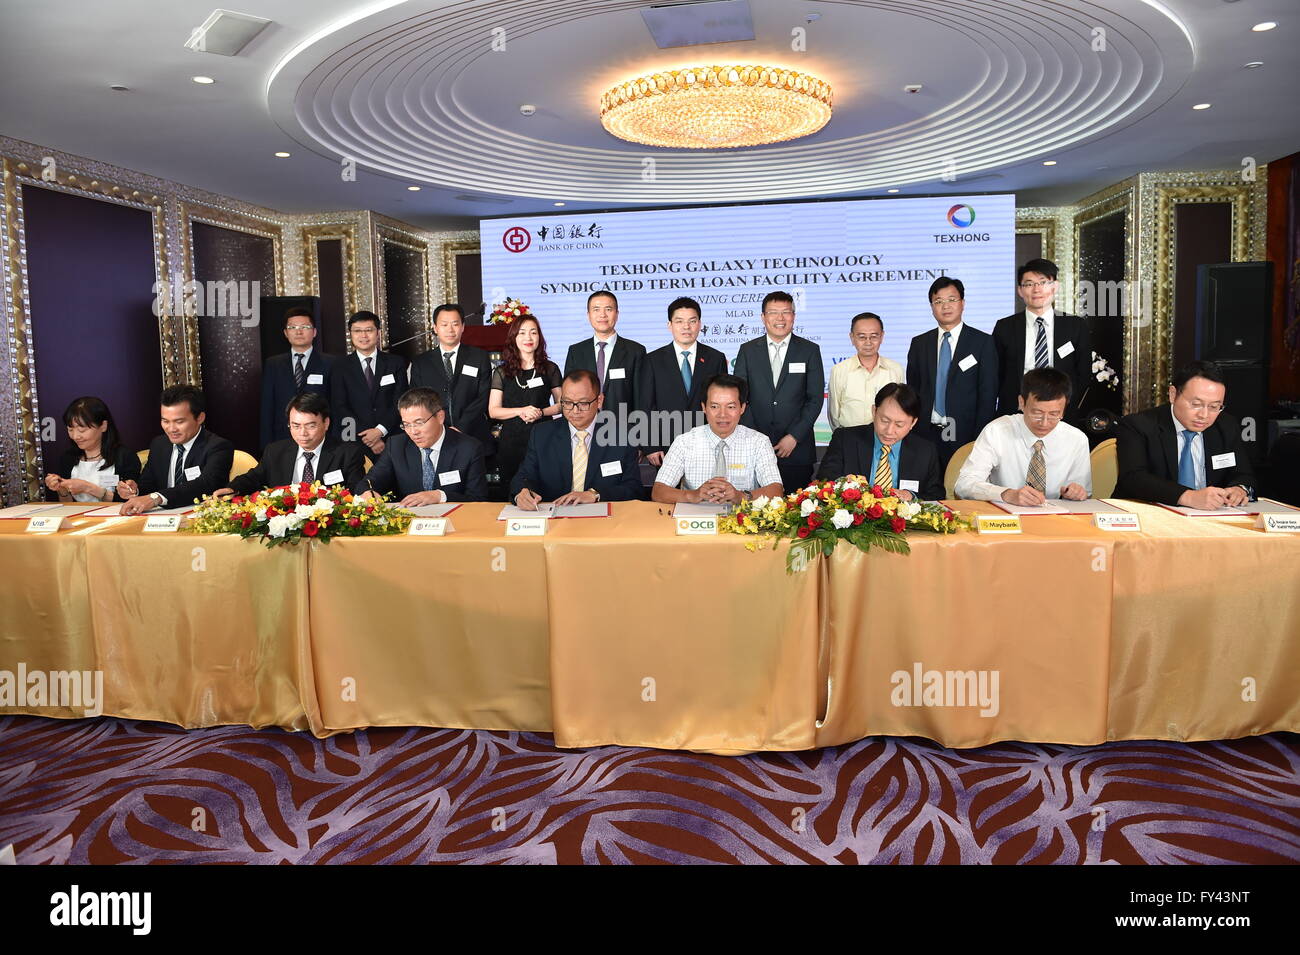 Ho Chi Minh City. 20th Apr, 2016. Photo taken on April 20, 2016 shows a view of the signing ceremony in Ho Chi Minh City, Vietnam. Bank of China's (BOC) Ho Chi Minh City Branch signed here Wednesday a 103-million U.S. dollar syndicated loan for a Vietnam-based subsidiary of leading Chinese yarn manufacturer Texhong Textile Group, partly helping foster the good investment and trade relations between the two countries. © Nguyen Le Huyen/Xinhua/Alamy Live News Stock Photo